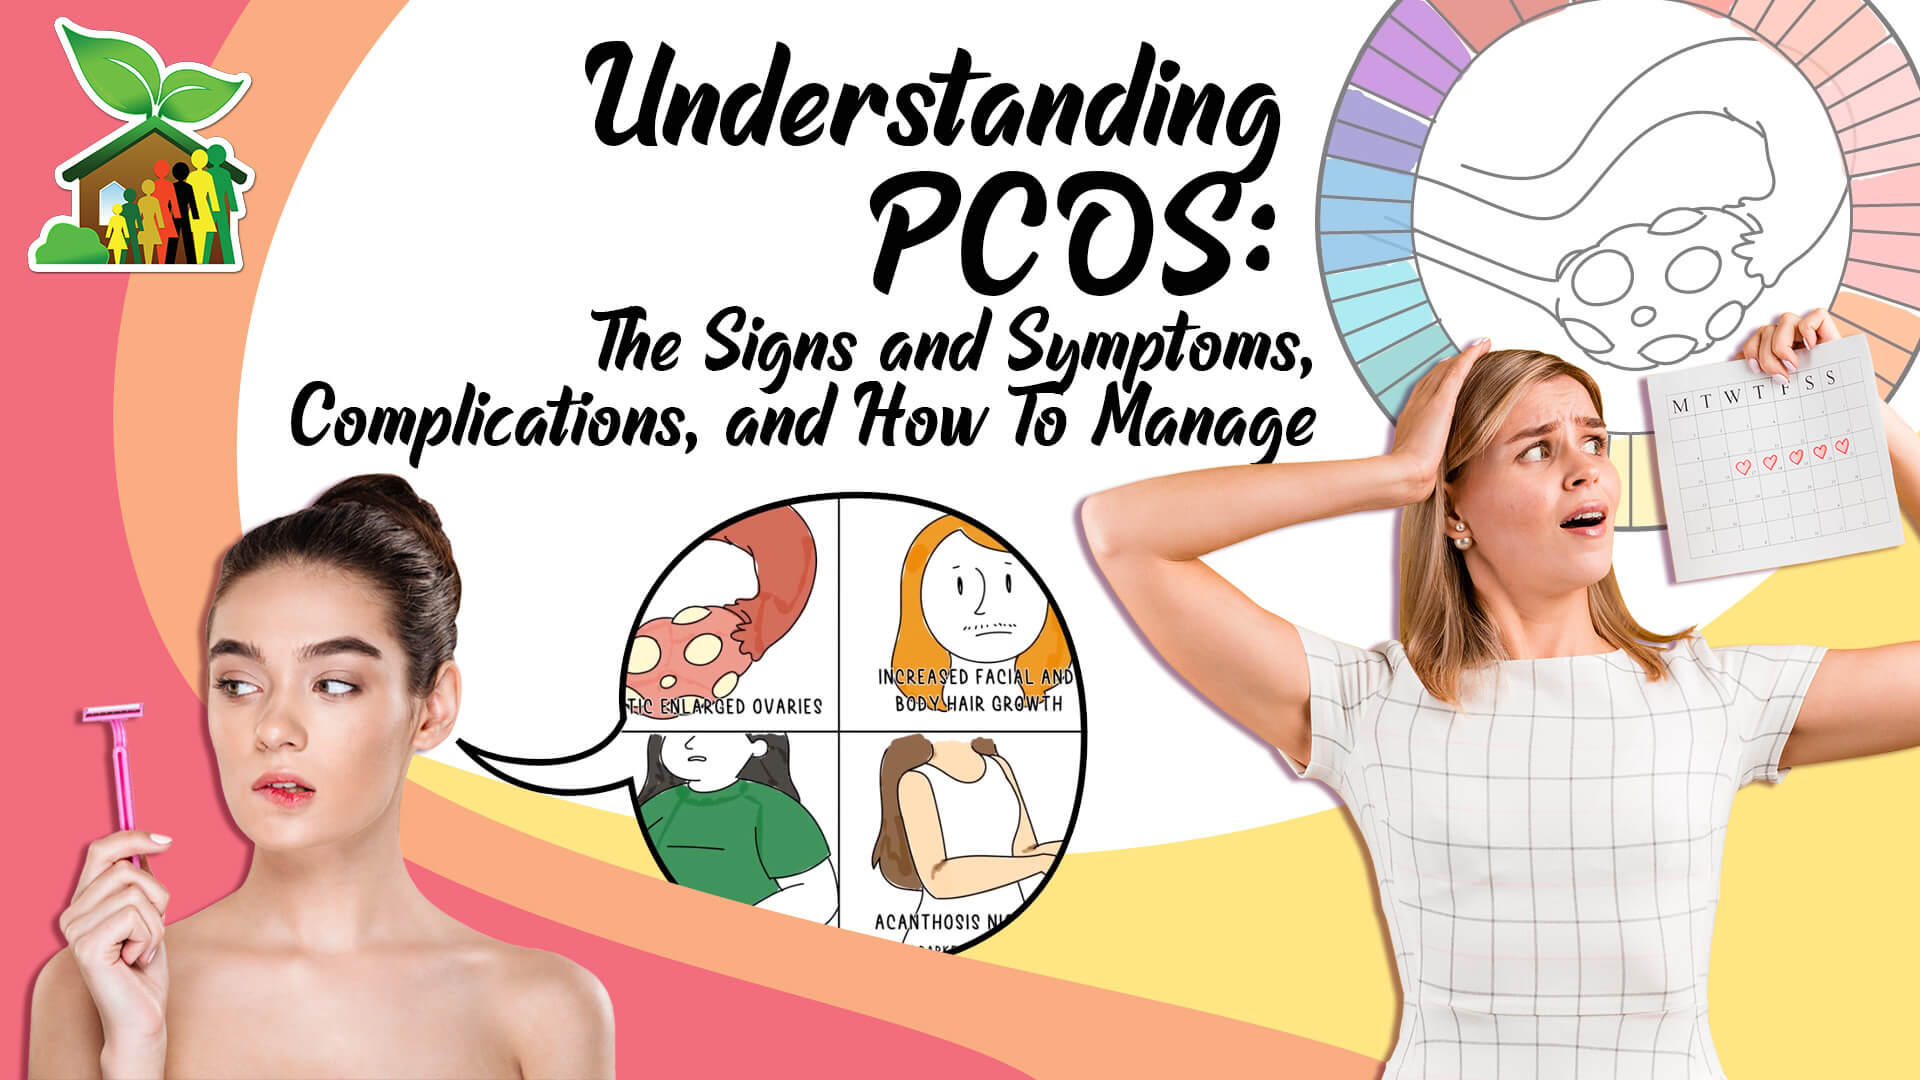 Understanding PCOS: The Signs And Symptoms, Complications, And How To Manage